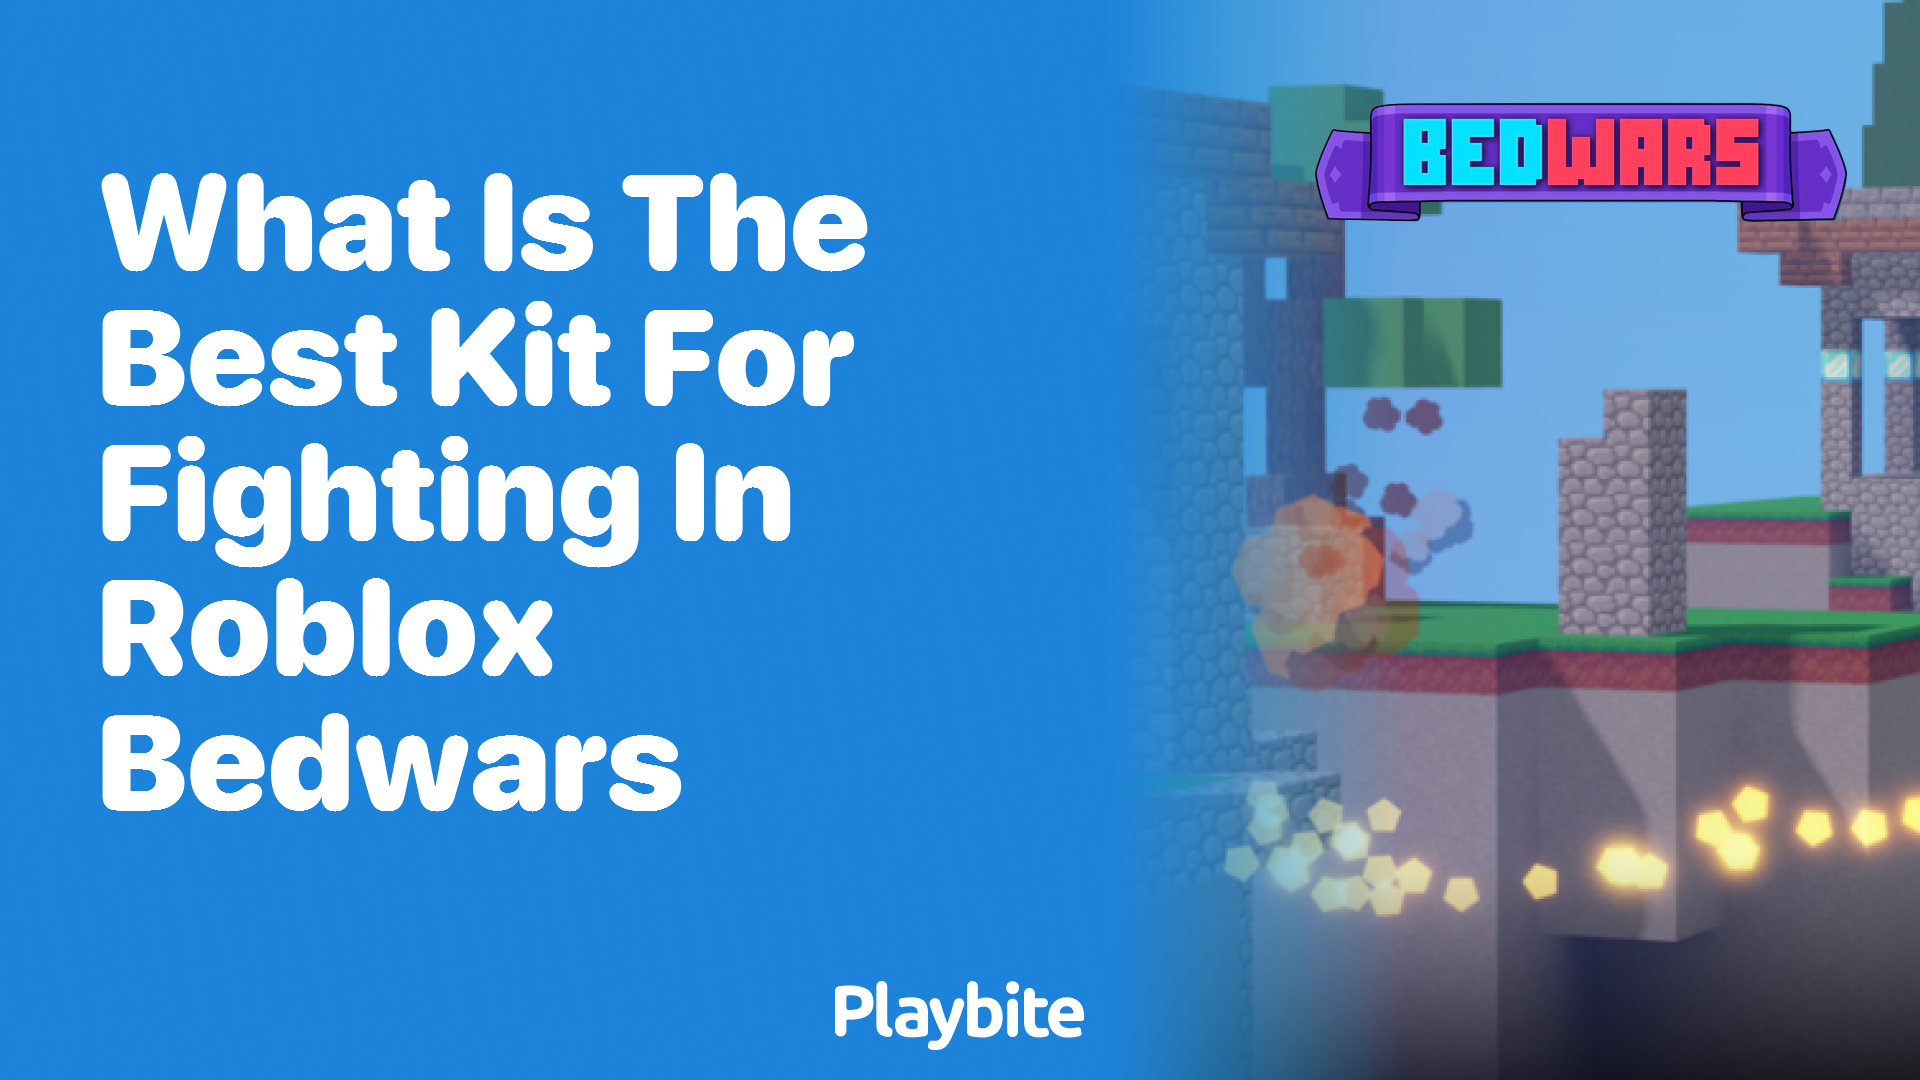 What is the Best Kit for Fighting in Roblox Bedwars?